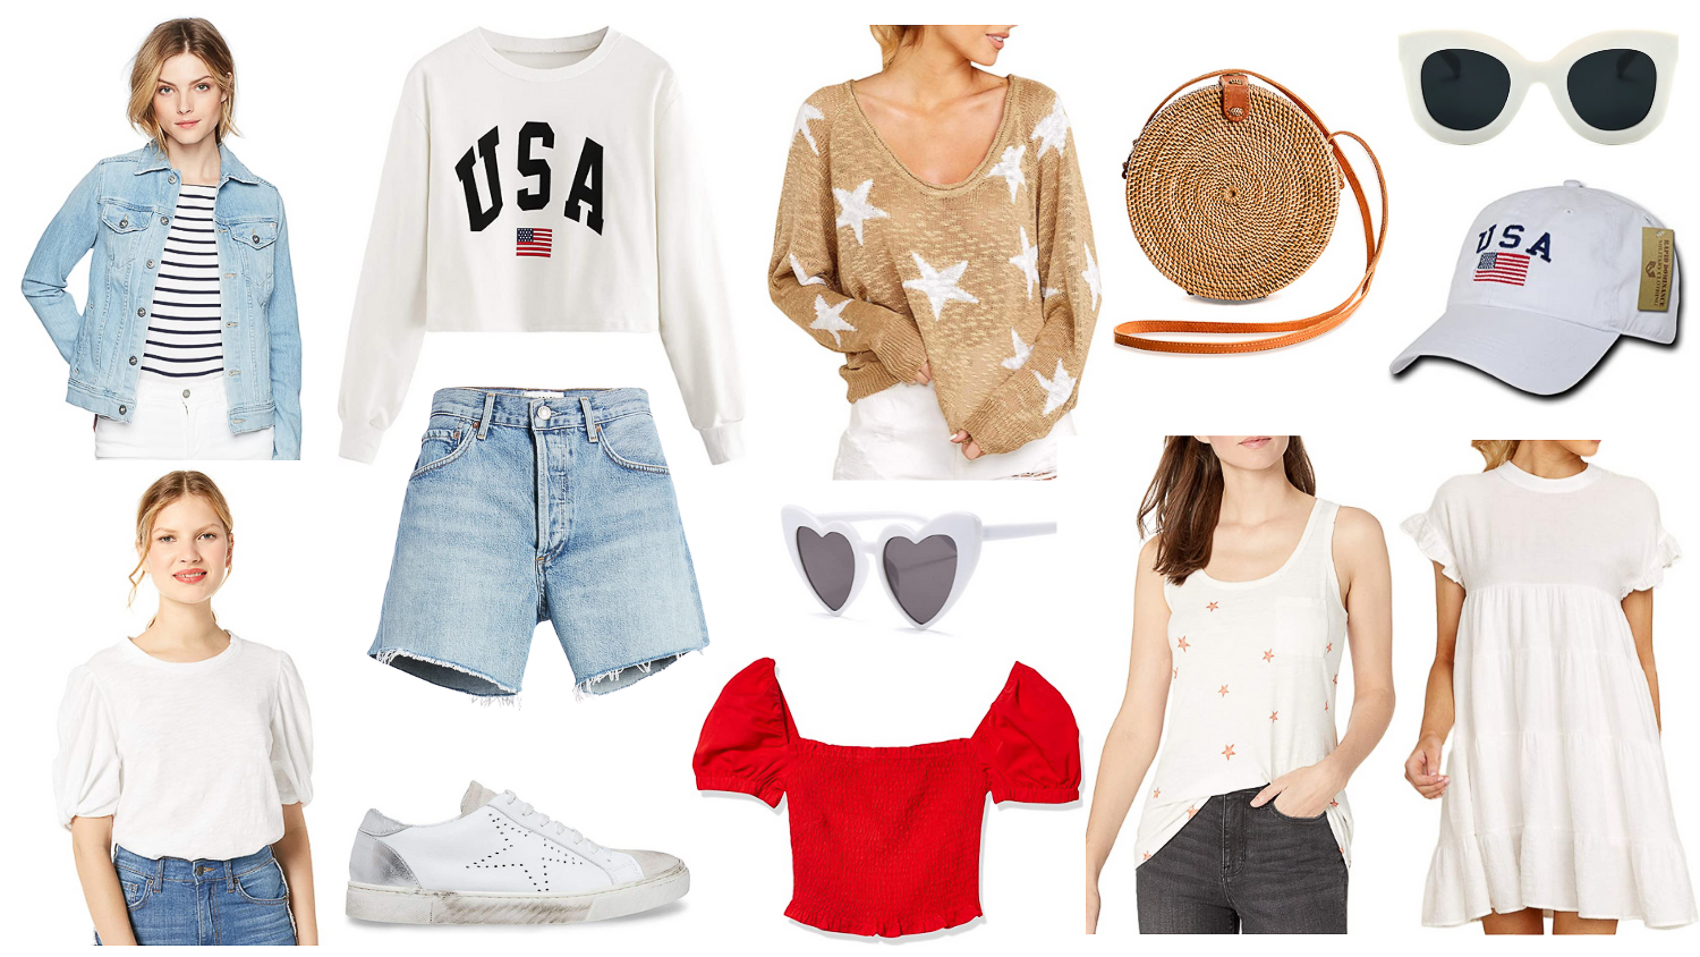 MY FESTIVE FOURTH OF JULY OUTFIT GUIDE - NotJessFashion